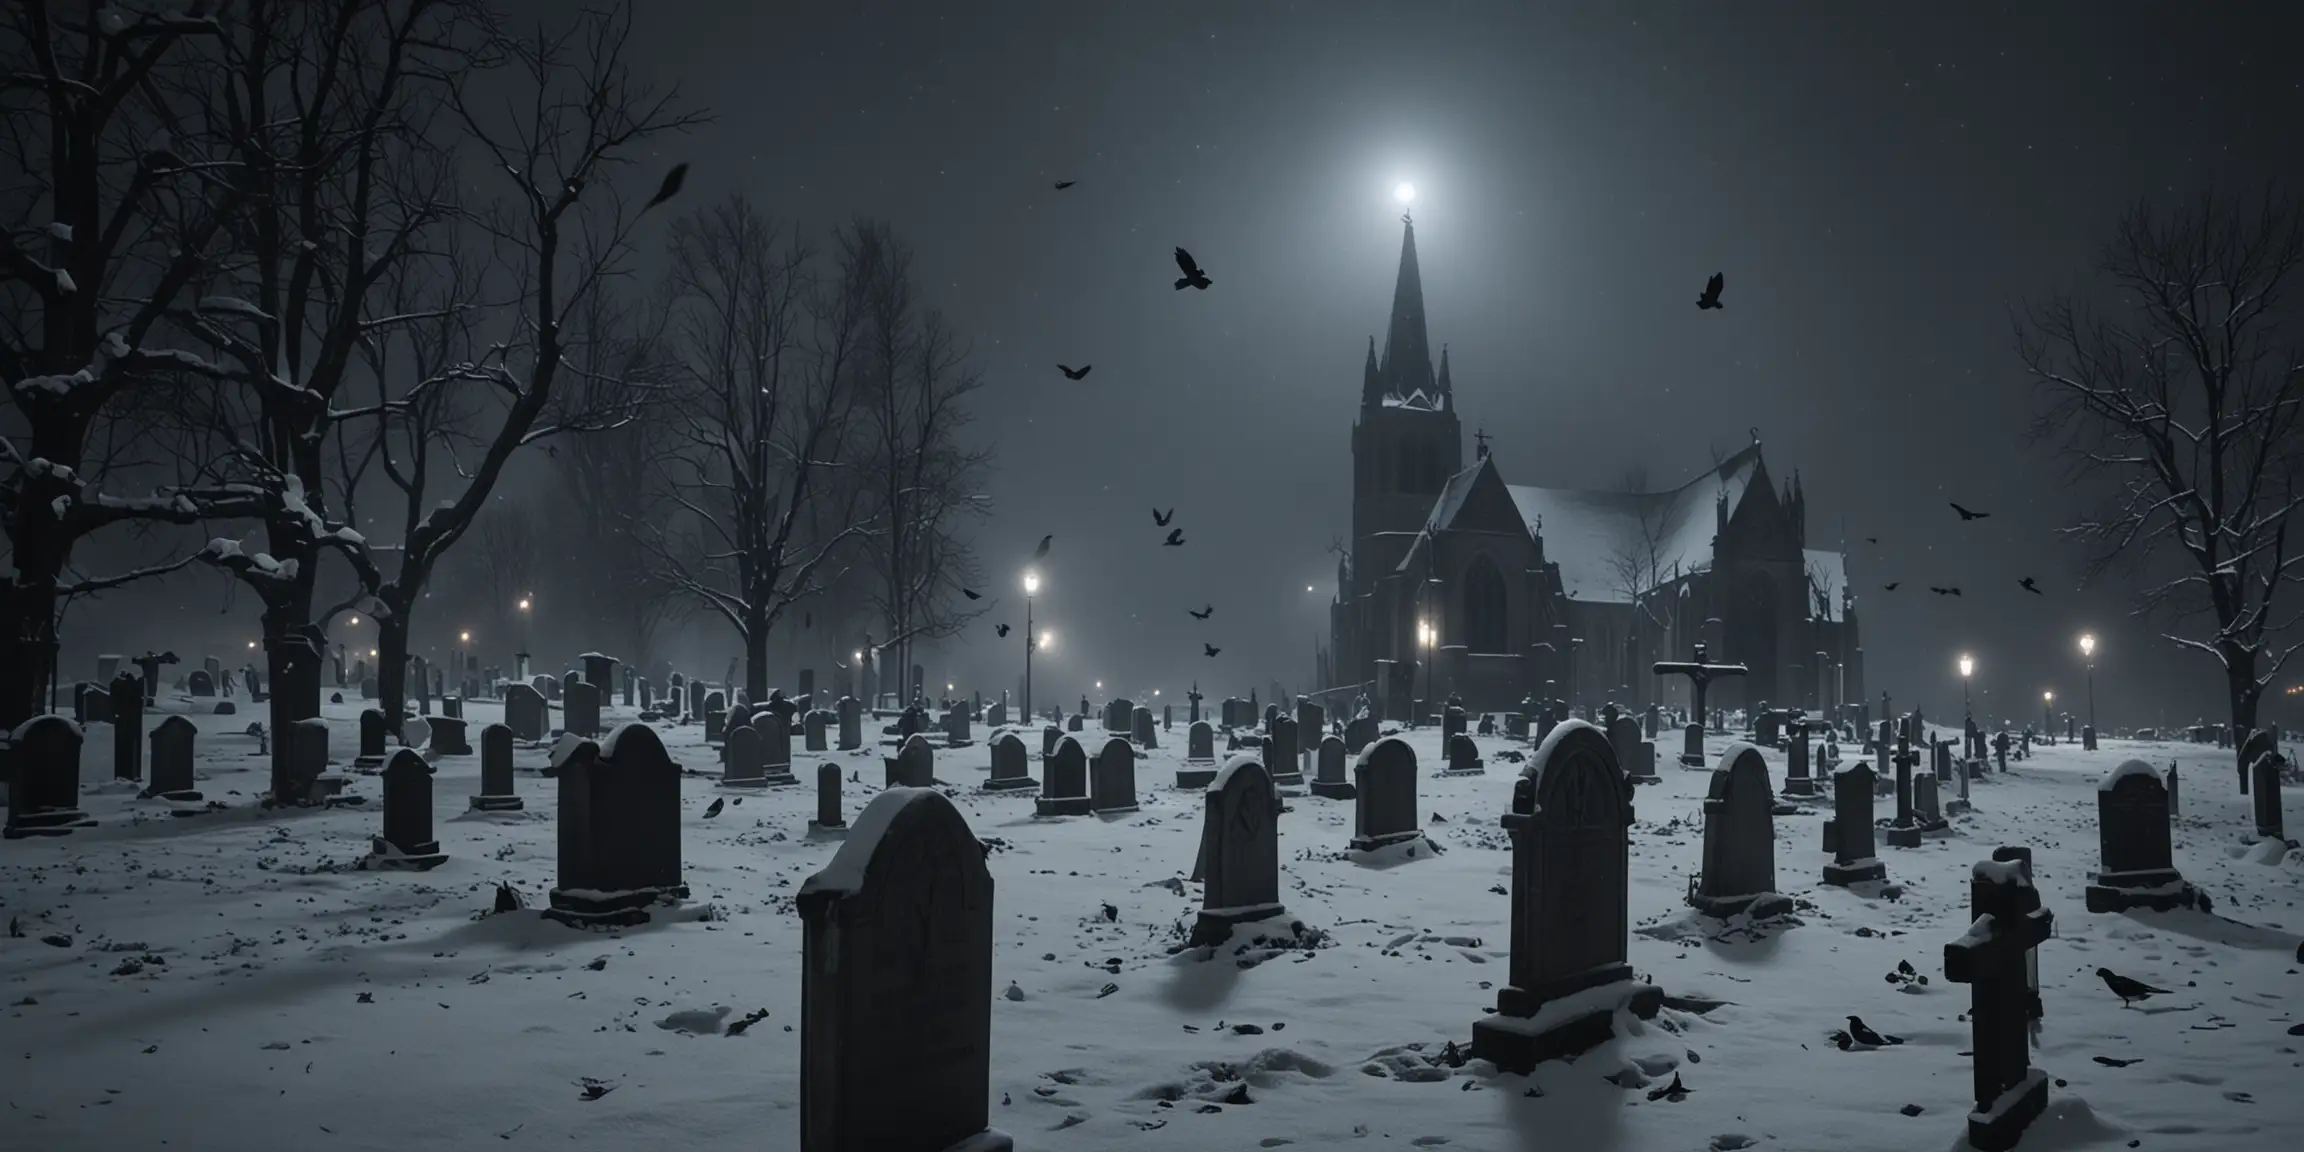 Gothic church graveyard covered in snow, crow, night